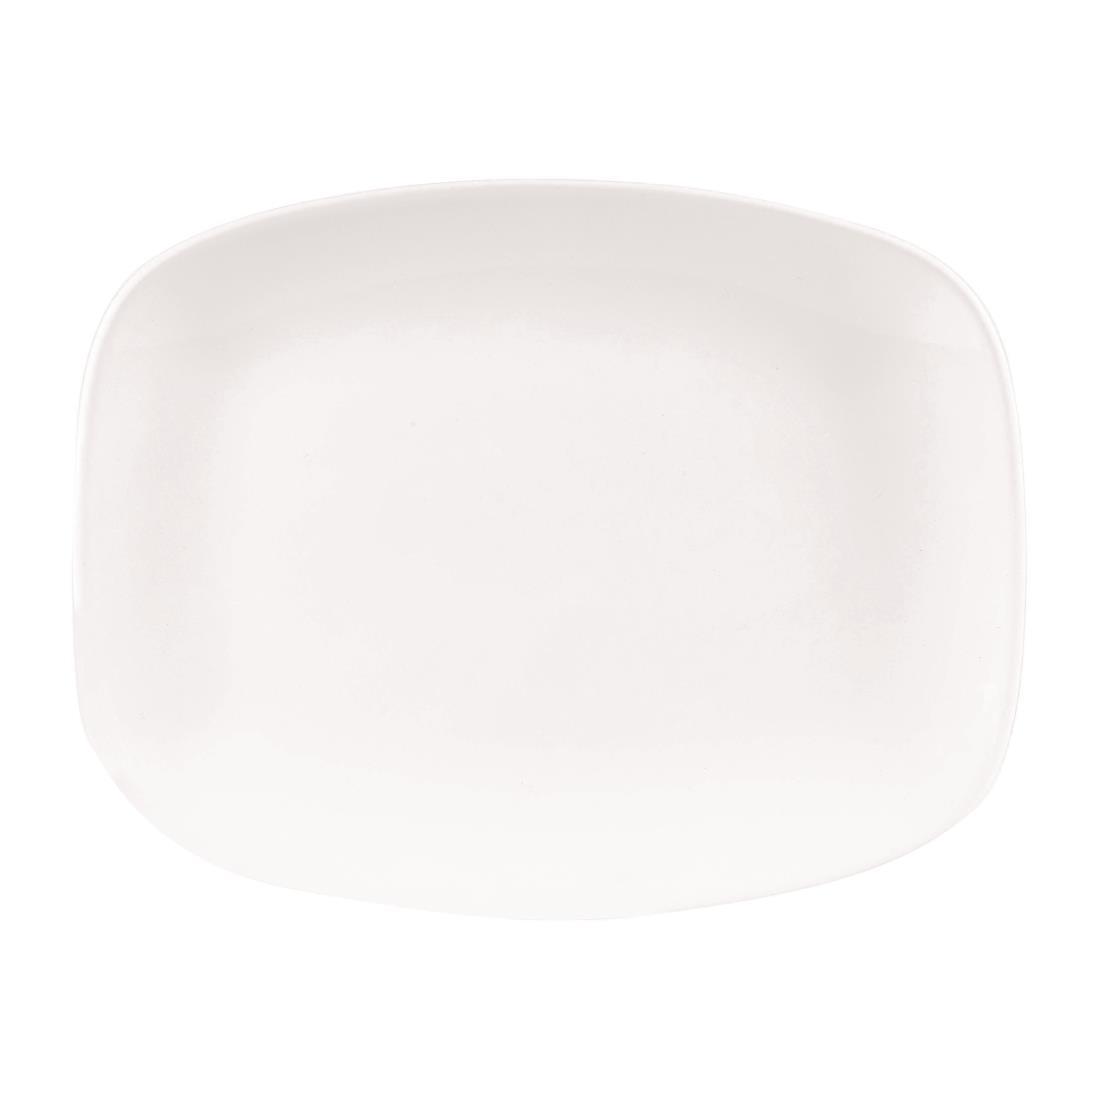 Churchill X Squared Oblong Plates White 202 x 261mm (Pack of 12) - DW341  - 2